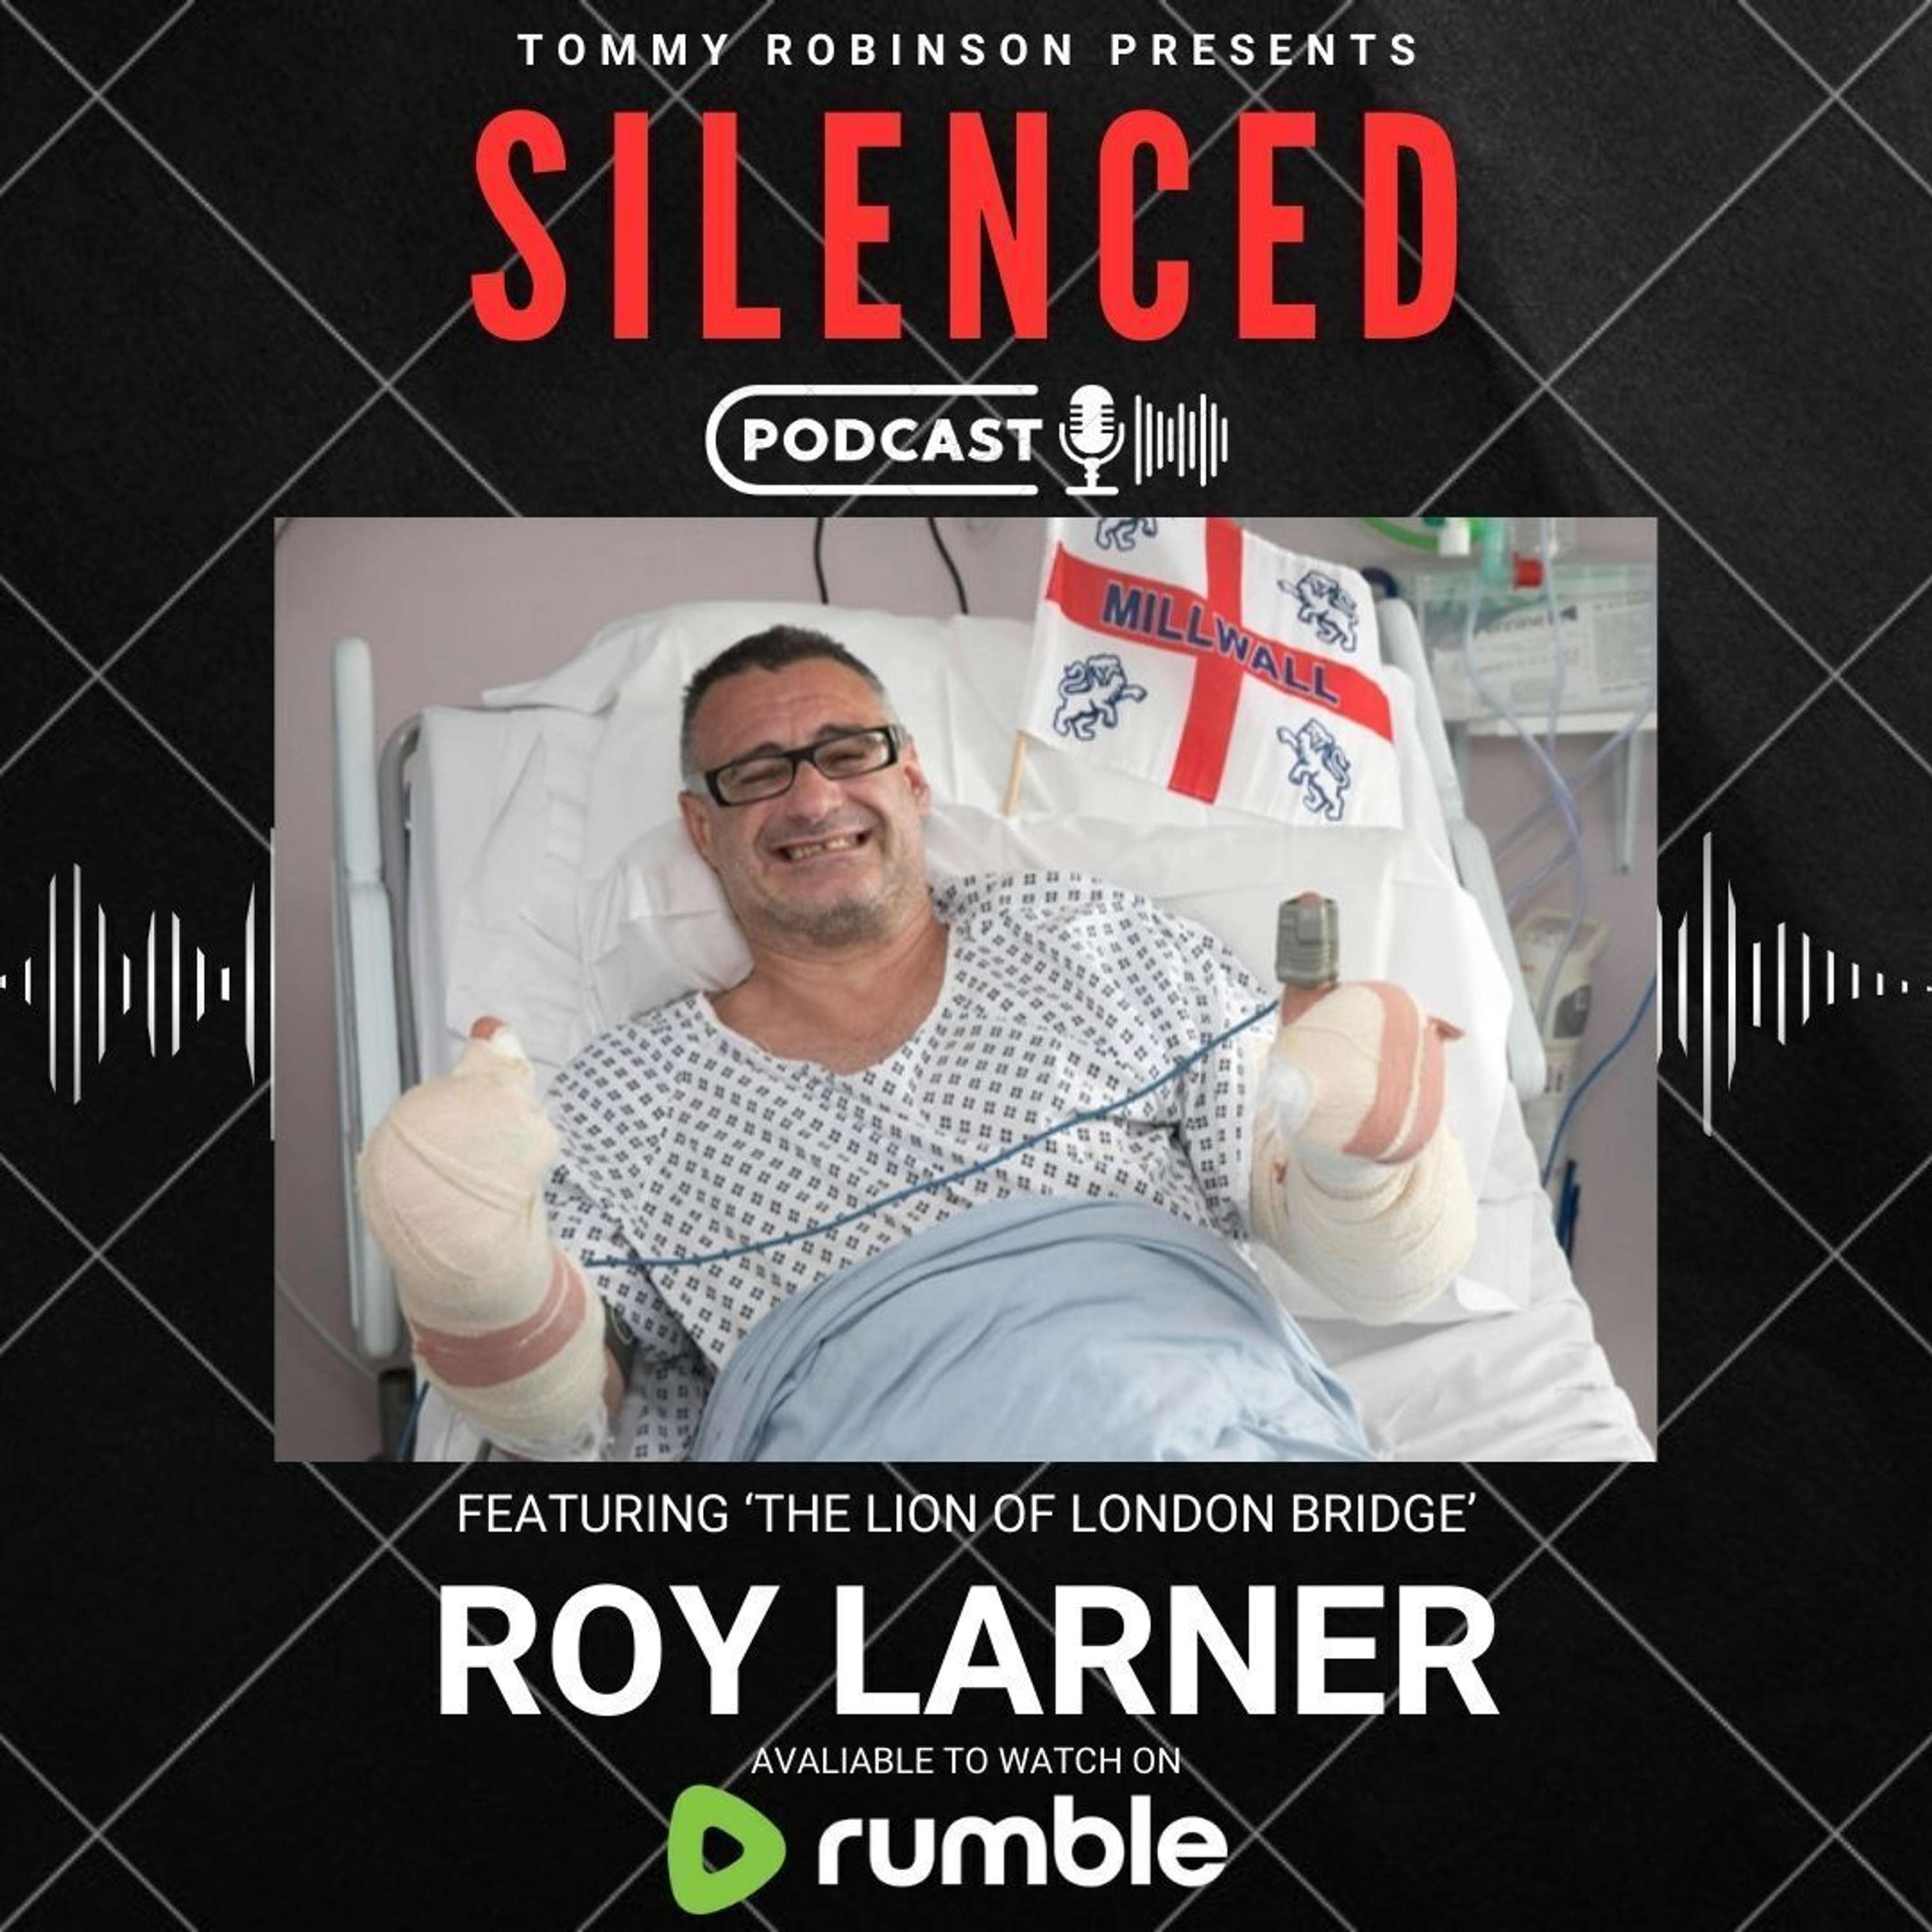 Episode 13 -SILENCED With Tommy Robinson - Roy Larner